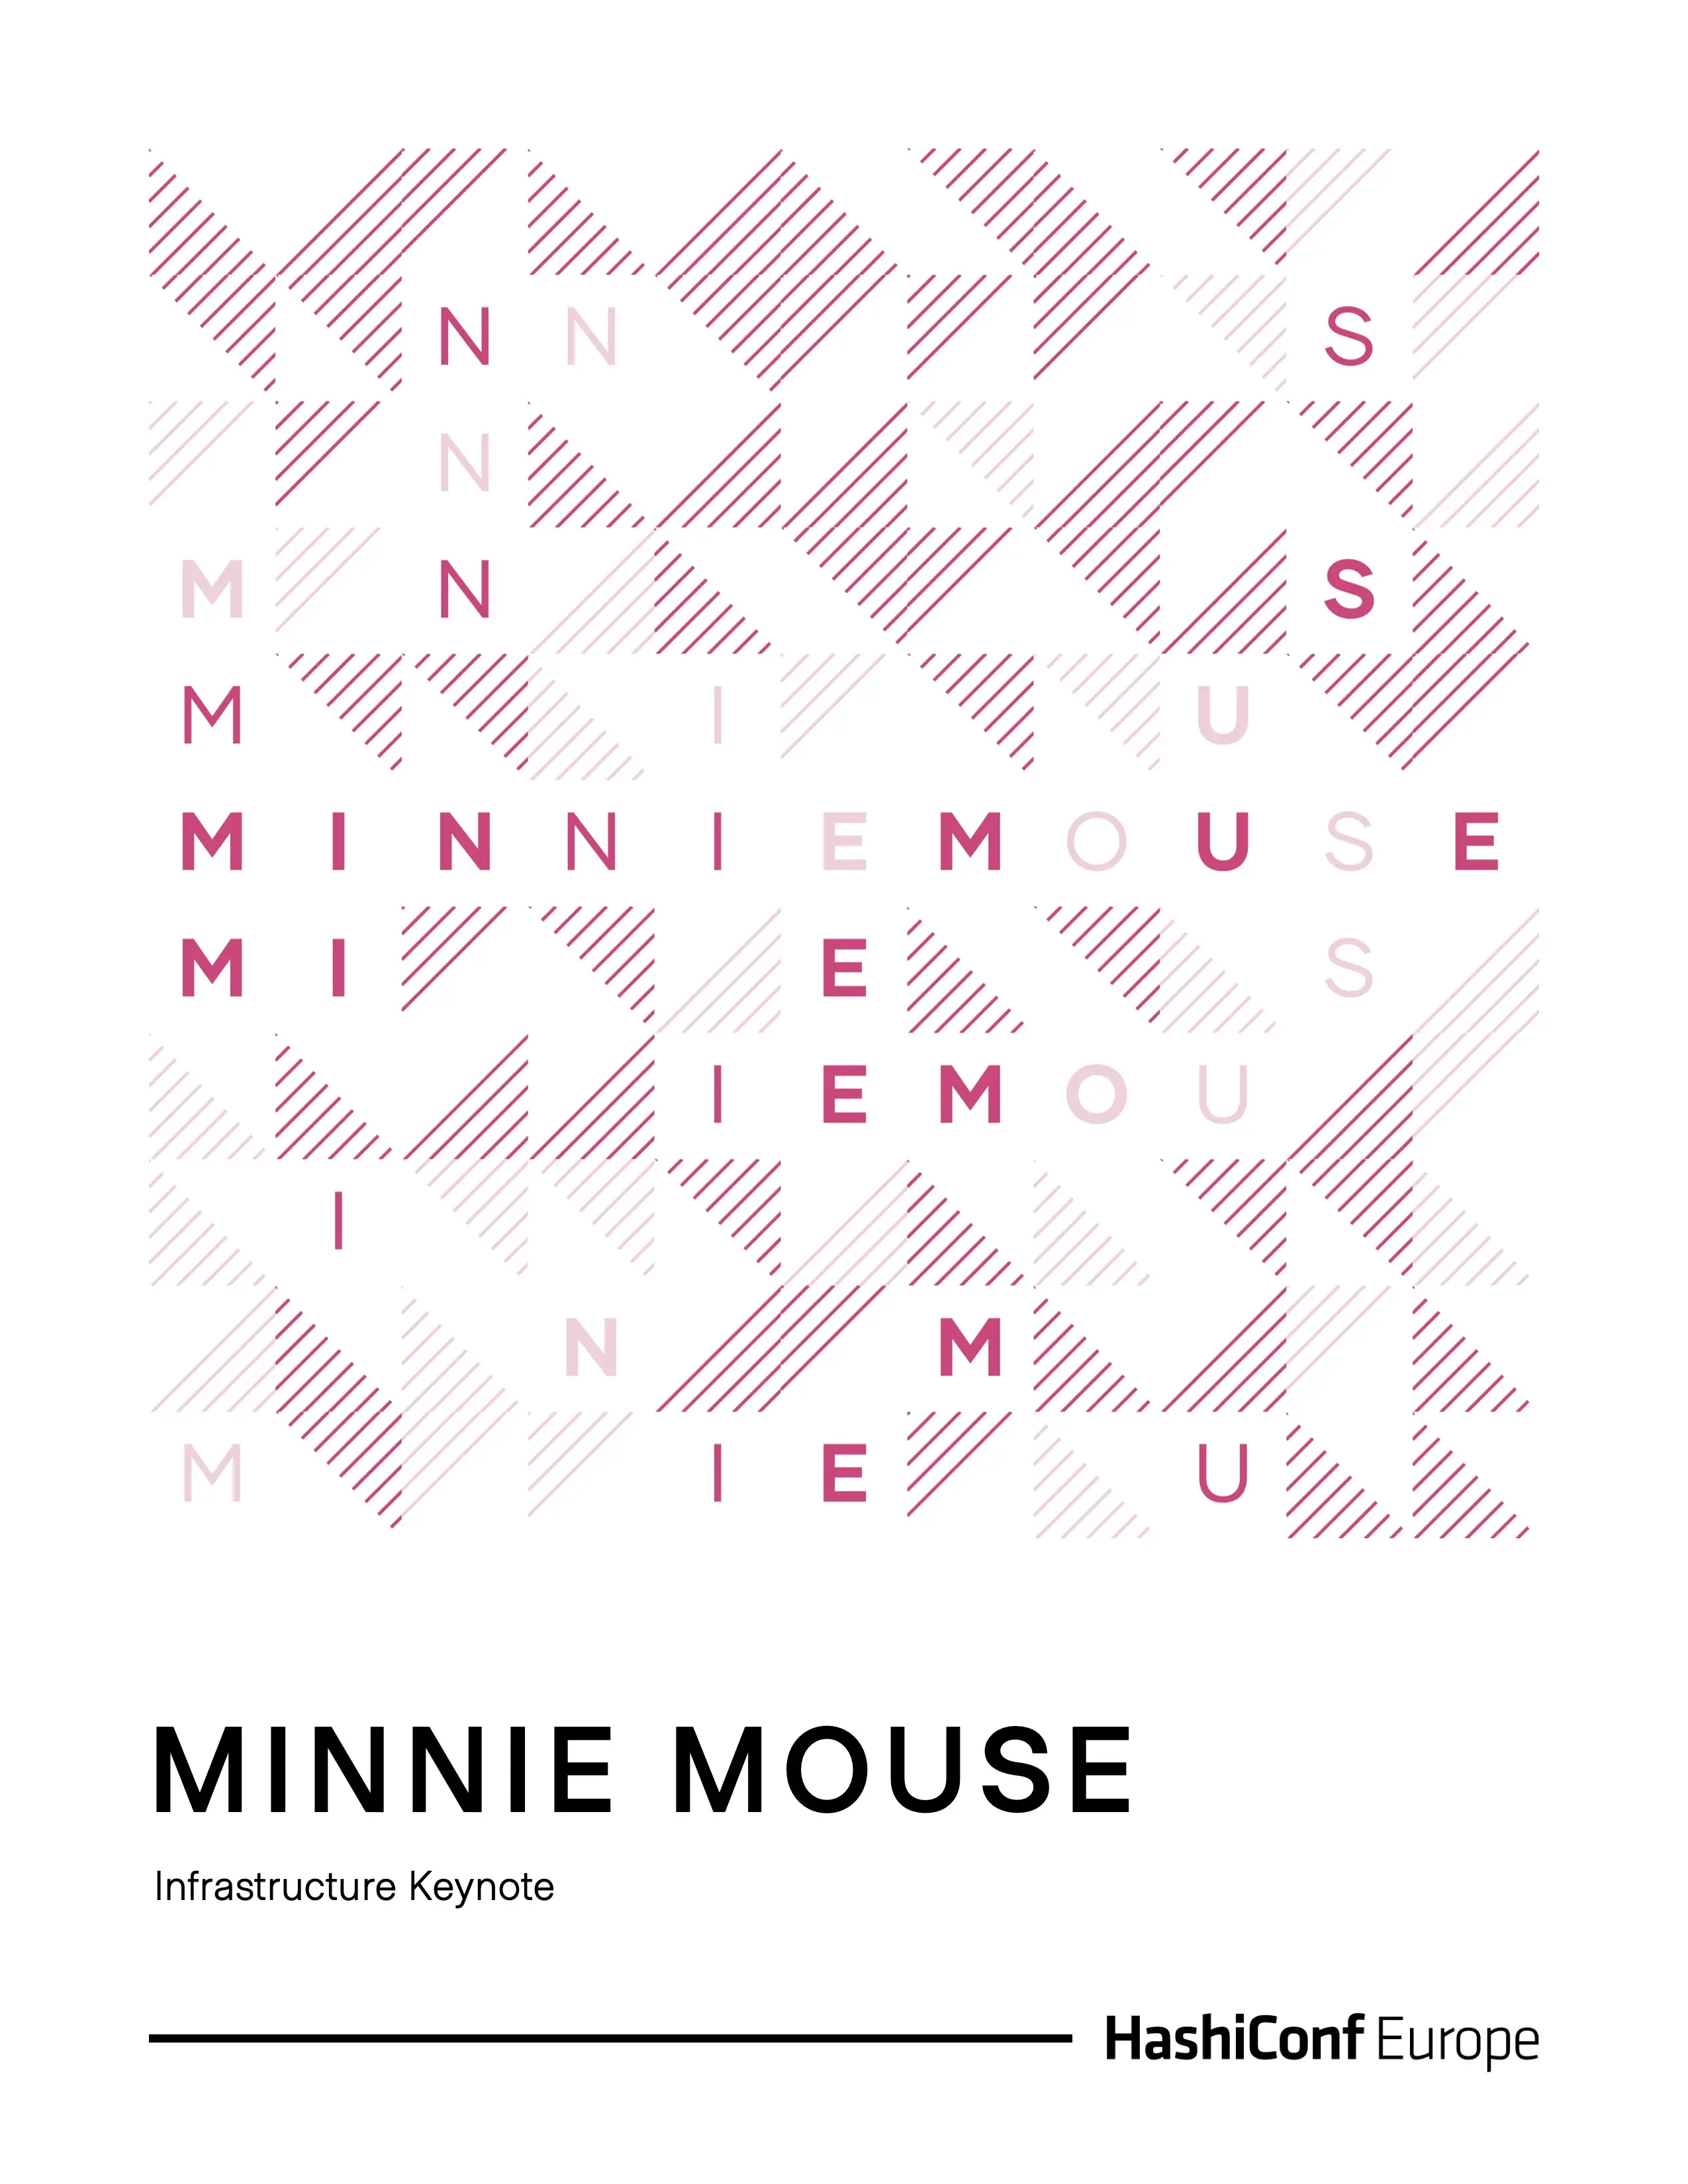 a poster for a person named minnie mouse that consists of a grid of triangles and letters in the name, and then in the bottom part of the poster, the name minnie mouse in a big font, with a hashiconf europe footer